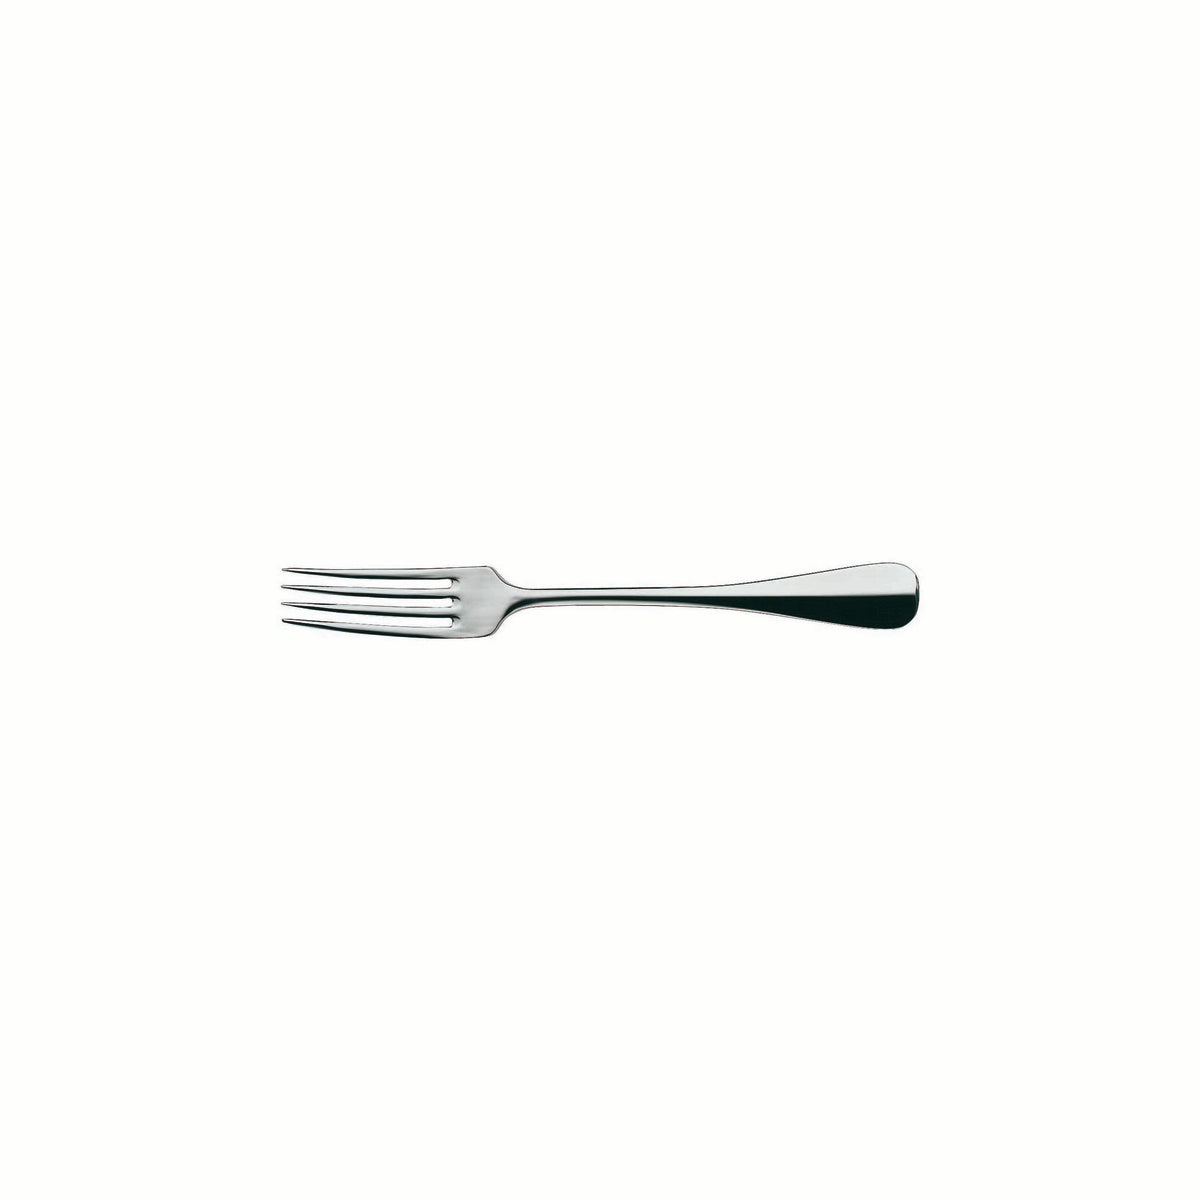 01.0115.6062 WMF Baguette Table Fork Small Silverplated Tomkin Australia Hospitality Supplies